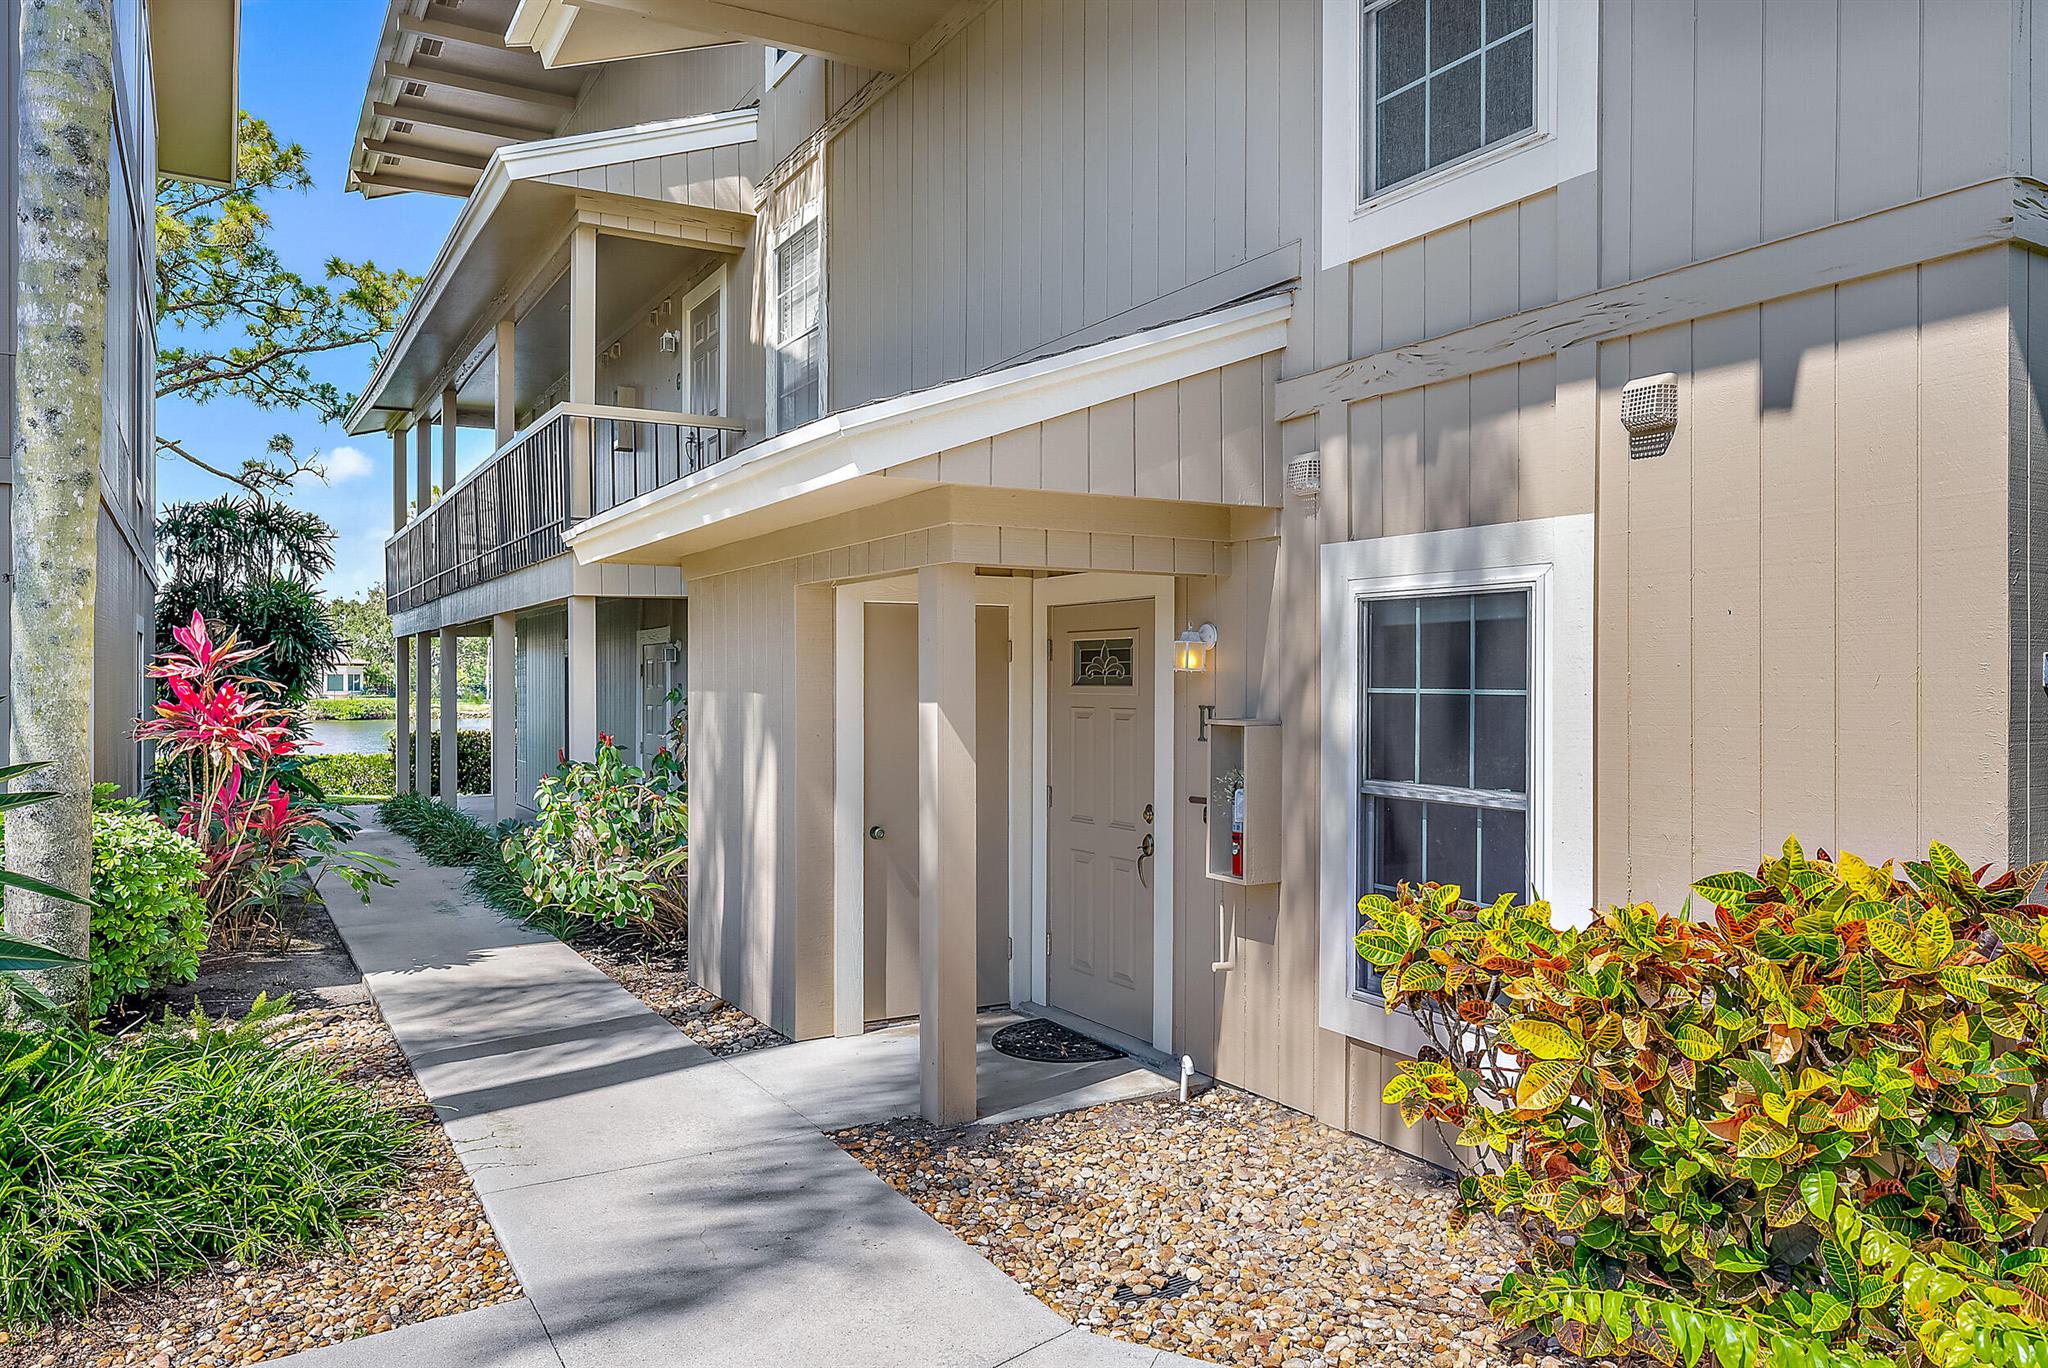 Welcome to 9170 SE Riverfront Terrace Unit H in Jupiter, FL! This STUNNING two-story 2-bedroom, 2.5-bathroom condo has over 1,200 square feet and is situated in the prestigious Riverbend Country Club.  Boasting IMPACT sliders, and NEW appliances, and breathtaking views of the Loxahatchee River. As you step inside, you'll be immediately struck by the spaciousness and overload of natural light! Continue into your new home, you have a half bath to your left and to your right you have the kitchen.  Your sizable kitchen has all stainless steel appliances, an LG side by side InstaView fridge along with a new dishwasher and microwave! The kitchen also features ample storage and counter space, an under counter wine fridge, and a passthrough window where you can see through to your dining and living areas and out to one of your two screened-in patios overlooking the picturesque blue water of the Loxahatchee River. 

Your open dining room leads straight into your large and expansive living room that has sliding glass doors leading out to one of your two screened-in patios. Your beautiful outdoor space provides a tranquil and serene living environment overlooking the beautiful blue water from the Loxahatchee River and is the perfect place to enjoy your morning cup of coffee or a glass of wine at the end of the day. 

Head upstairs to find the primary suite, guest bedroom and second full bathroom. Your LARGE primary suite offers TWO large closets, a generous sized ensuite with a built-in vanity and a bath/shower combo, as well as a PRIVATE screened-in balcony overlooking lush greenery and the beautiful blue water. The guest bedroom is generously sized offering a sufficient amount of storage and letting in an abundant amount of natural light. 

Other notable features include impact sliders to ensure your safety during hurricane season AND new appliances, including a new hot water heater, dishwasher, washer, dryer, and microwave that all provide peace of mind and convenience.

As a resident of Riverbend Country Club, you'll also have access to a variety of luxury amenities, including golf course, tennis courts, a fitness center, and much more!

Located just a short drive from world-class dining, shopping, and entertainment in Jupiter and Palm Beach Gardens, this condo is perfectly situated for upscale living in one of South Florida's most sought-after locations.

This TURN-KEY unit is ready for its new owner and can be sold fully-furnished. Don't miss out on this incredible opportunity to enjoy the upscale living environment of Riverbend Country Club. 
